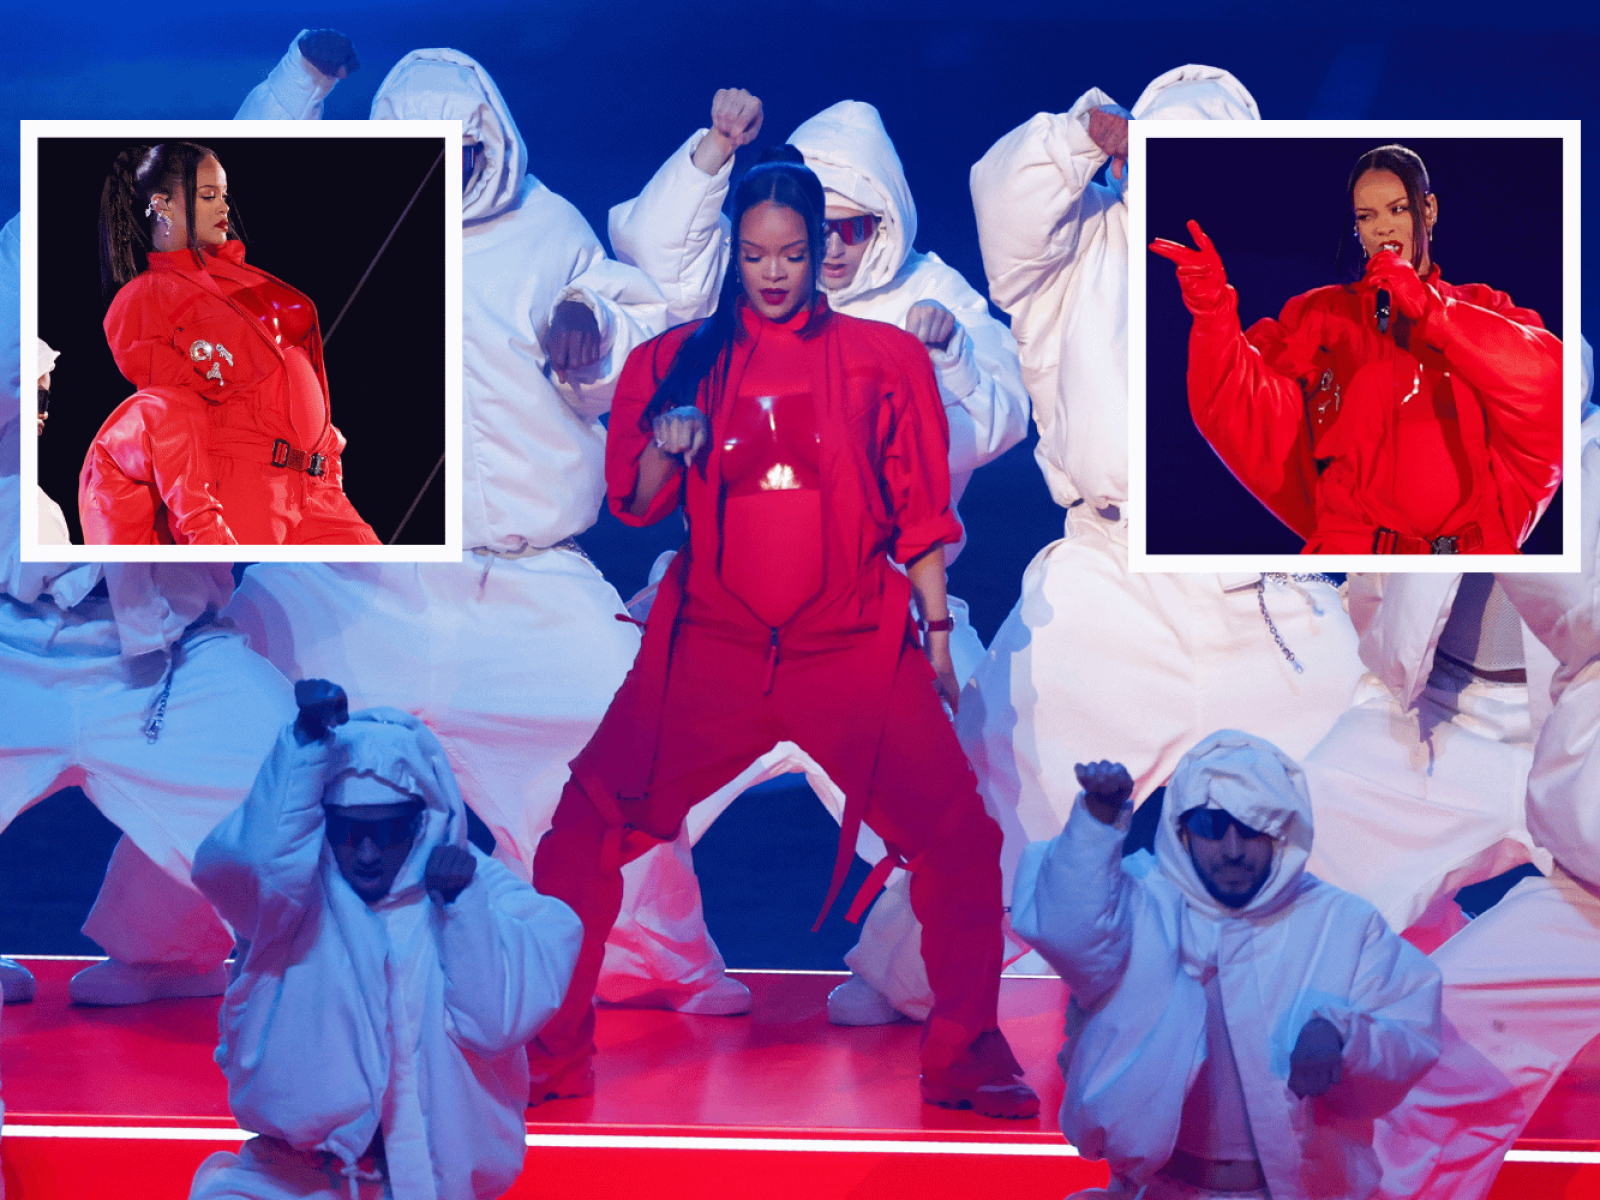 Rihanna's Super Bowl Outfit Called 'Powerful' by Some, 'Satanic' by Others